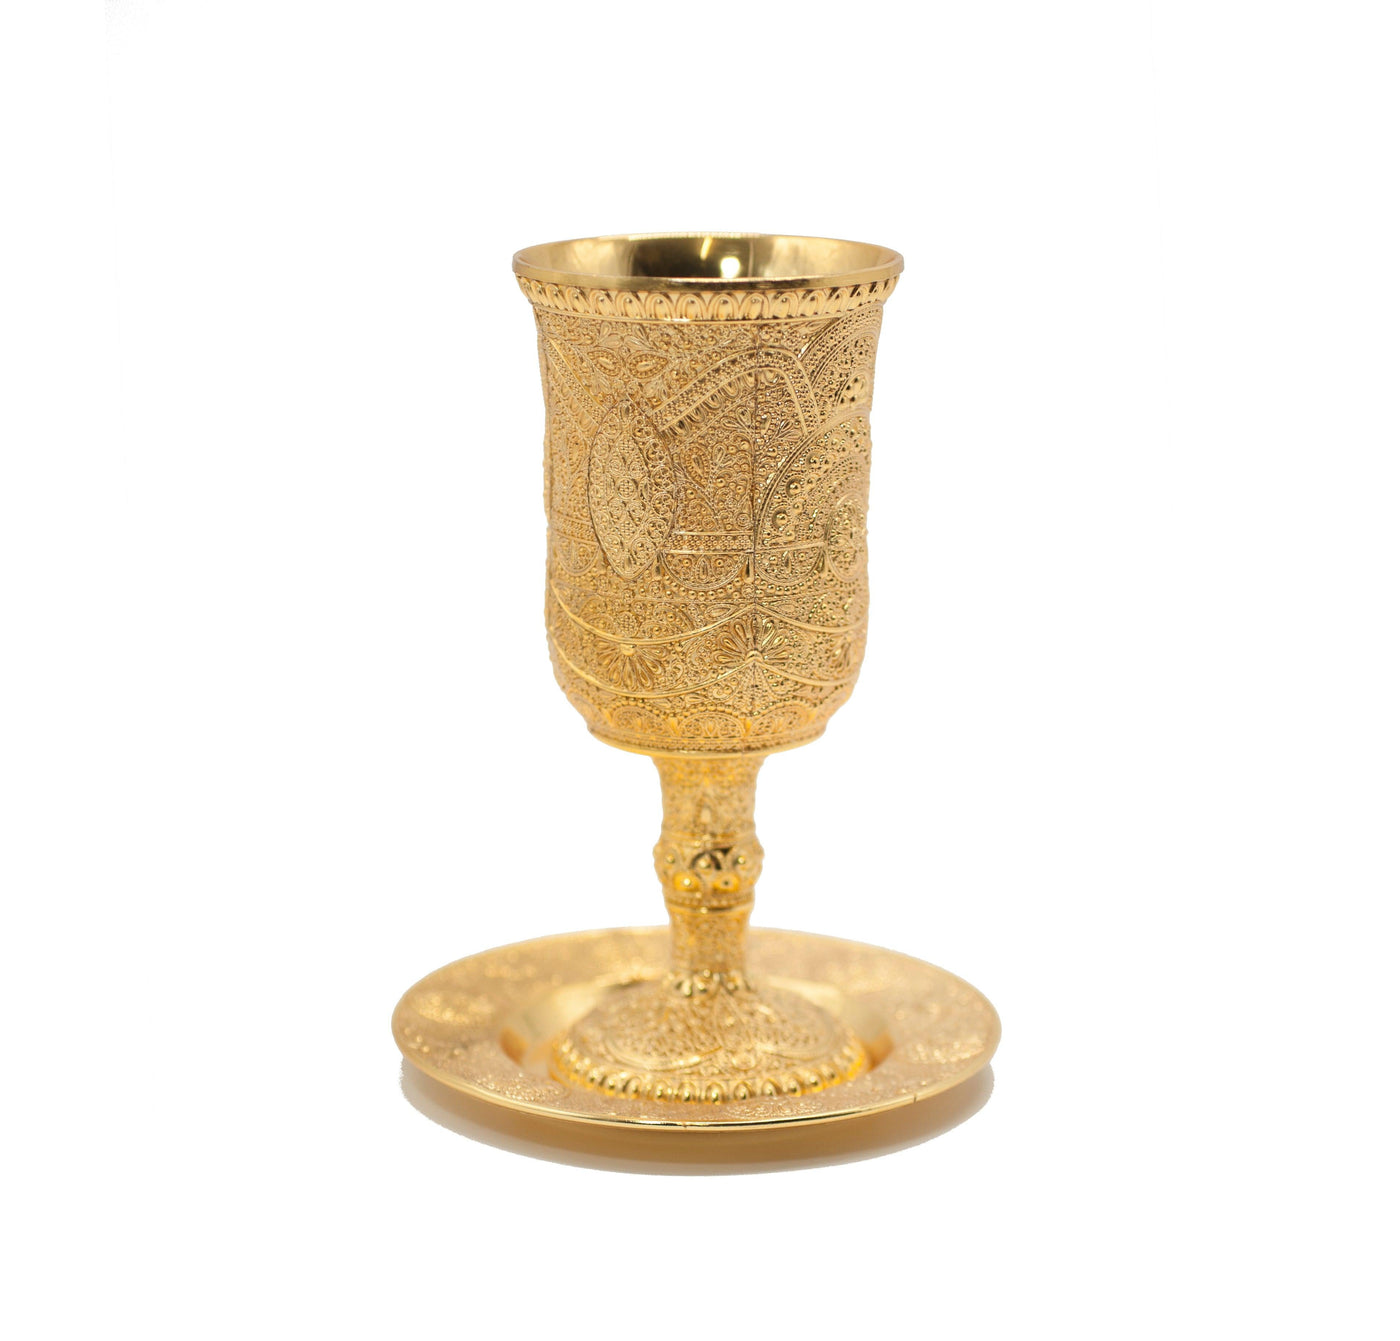 Jerusalem Kiddish Cup Gold plated made from the Holyland - Spring Nahal